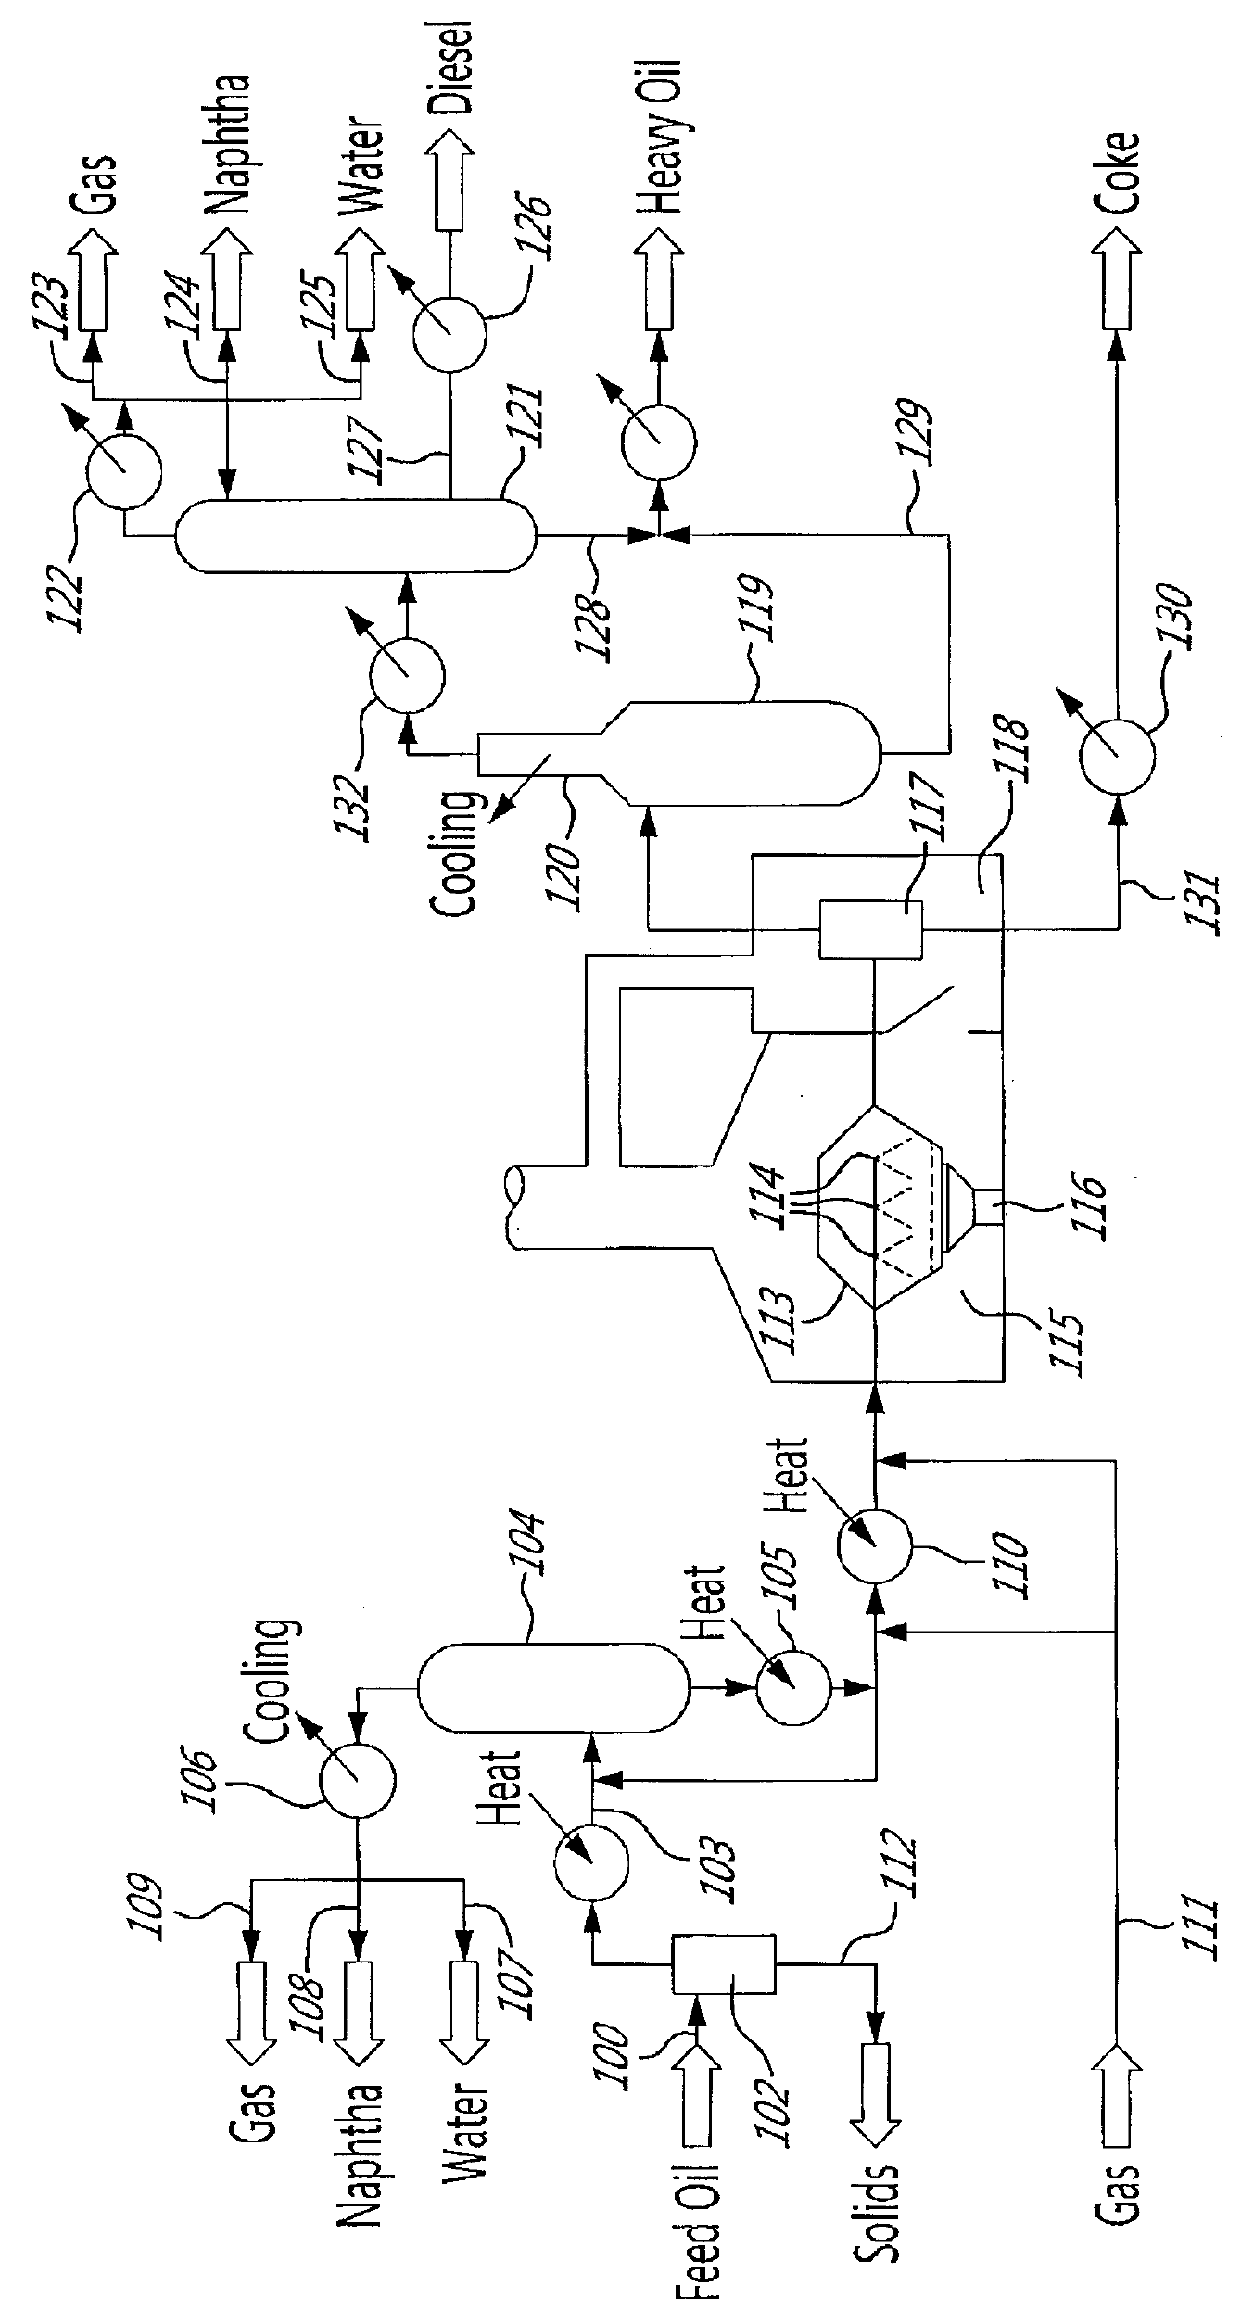 Hybrid thermal process to separate and transform contaminated or uncontaminated hydrocarbon materials into useful products, uses of the process, manufacturing of the corresponding system and plant